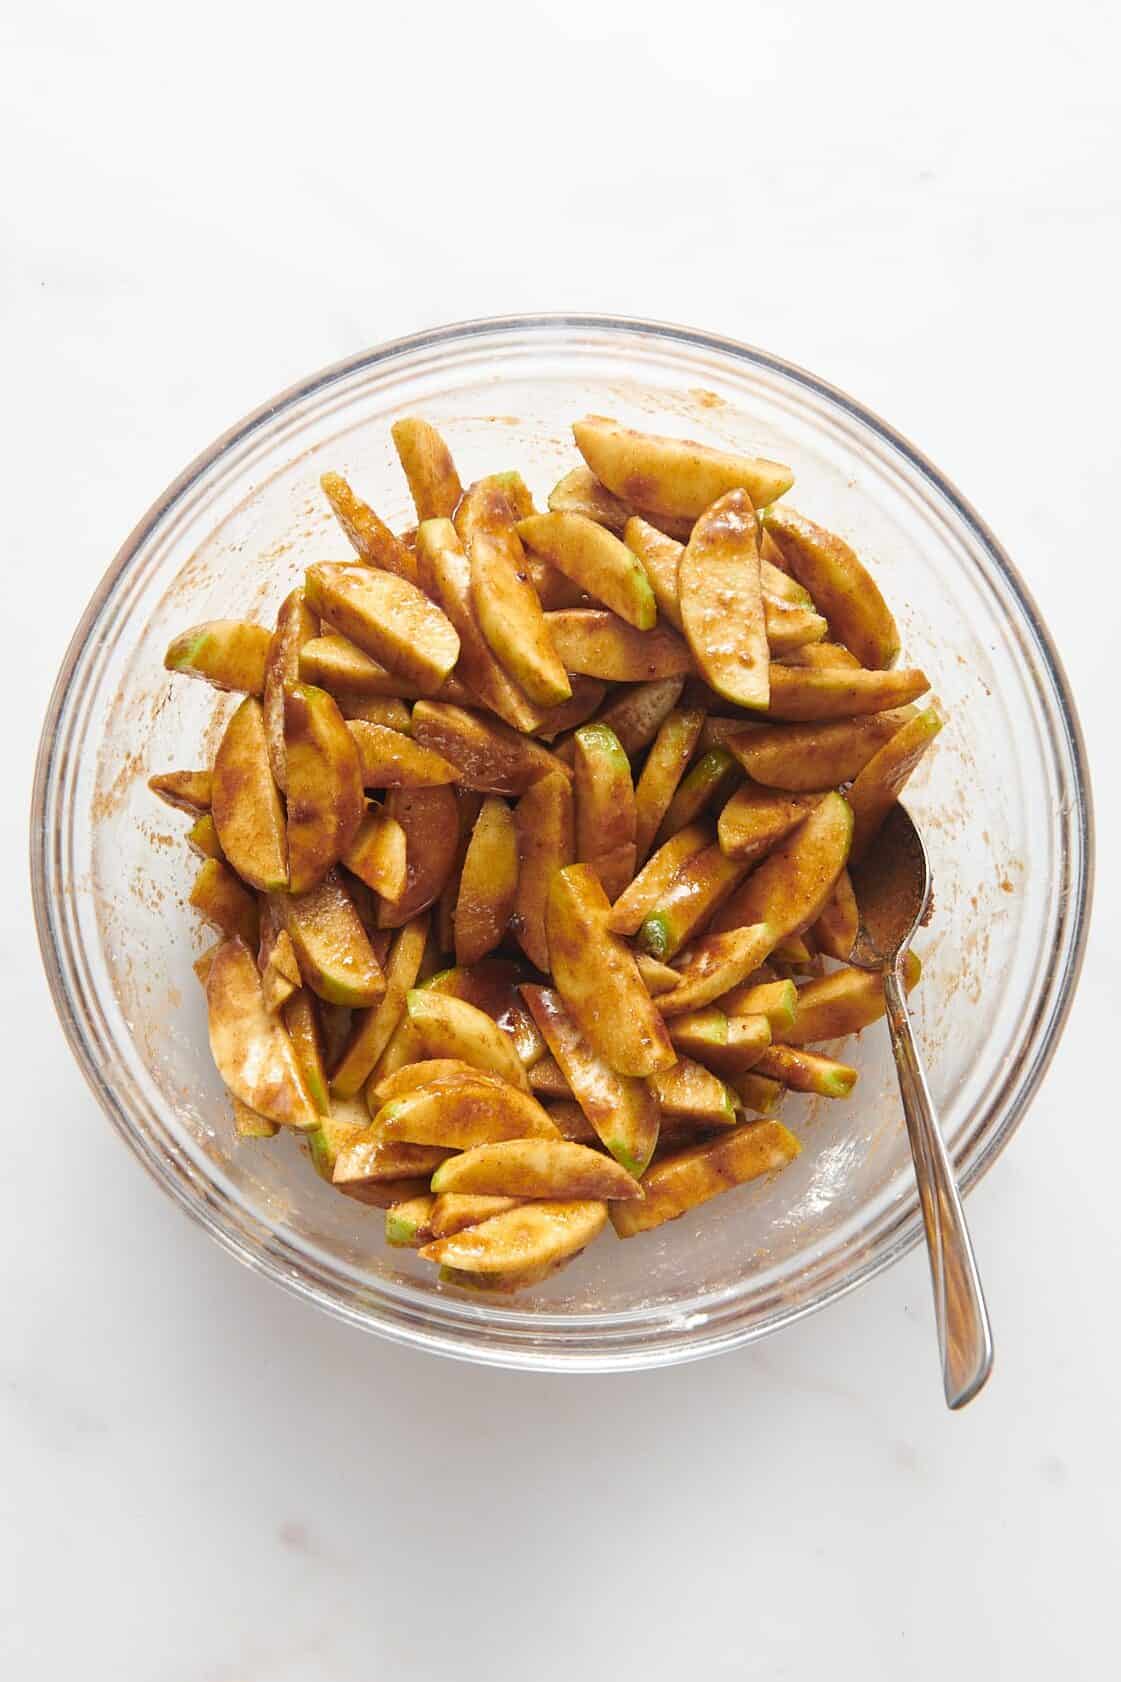 large glass bowl of sliced green apples tossed in a cinnamon, brown sugar mixture.